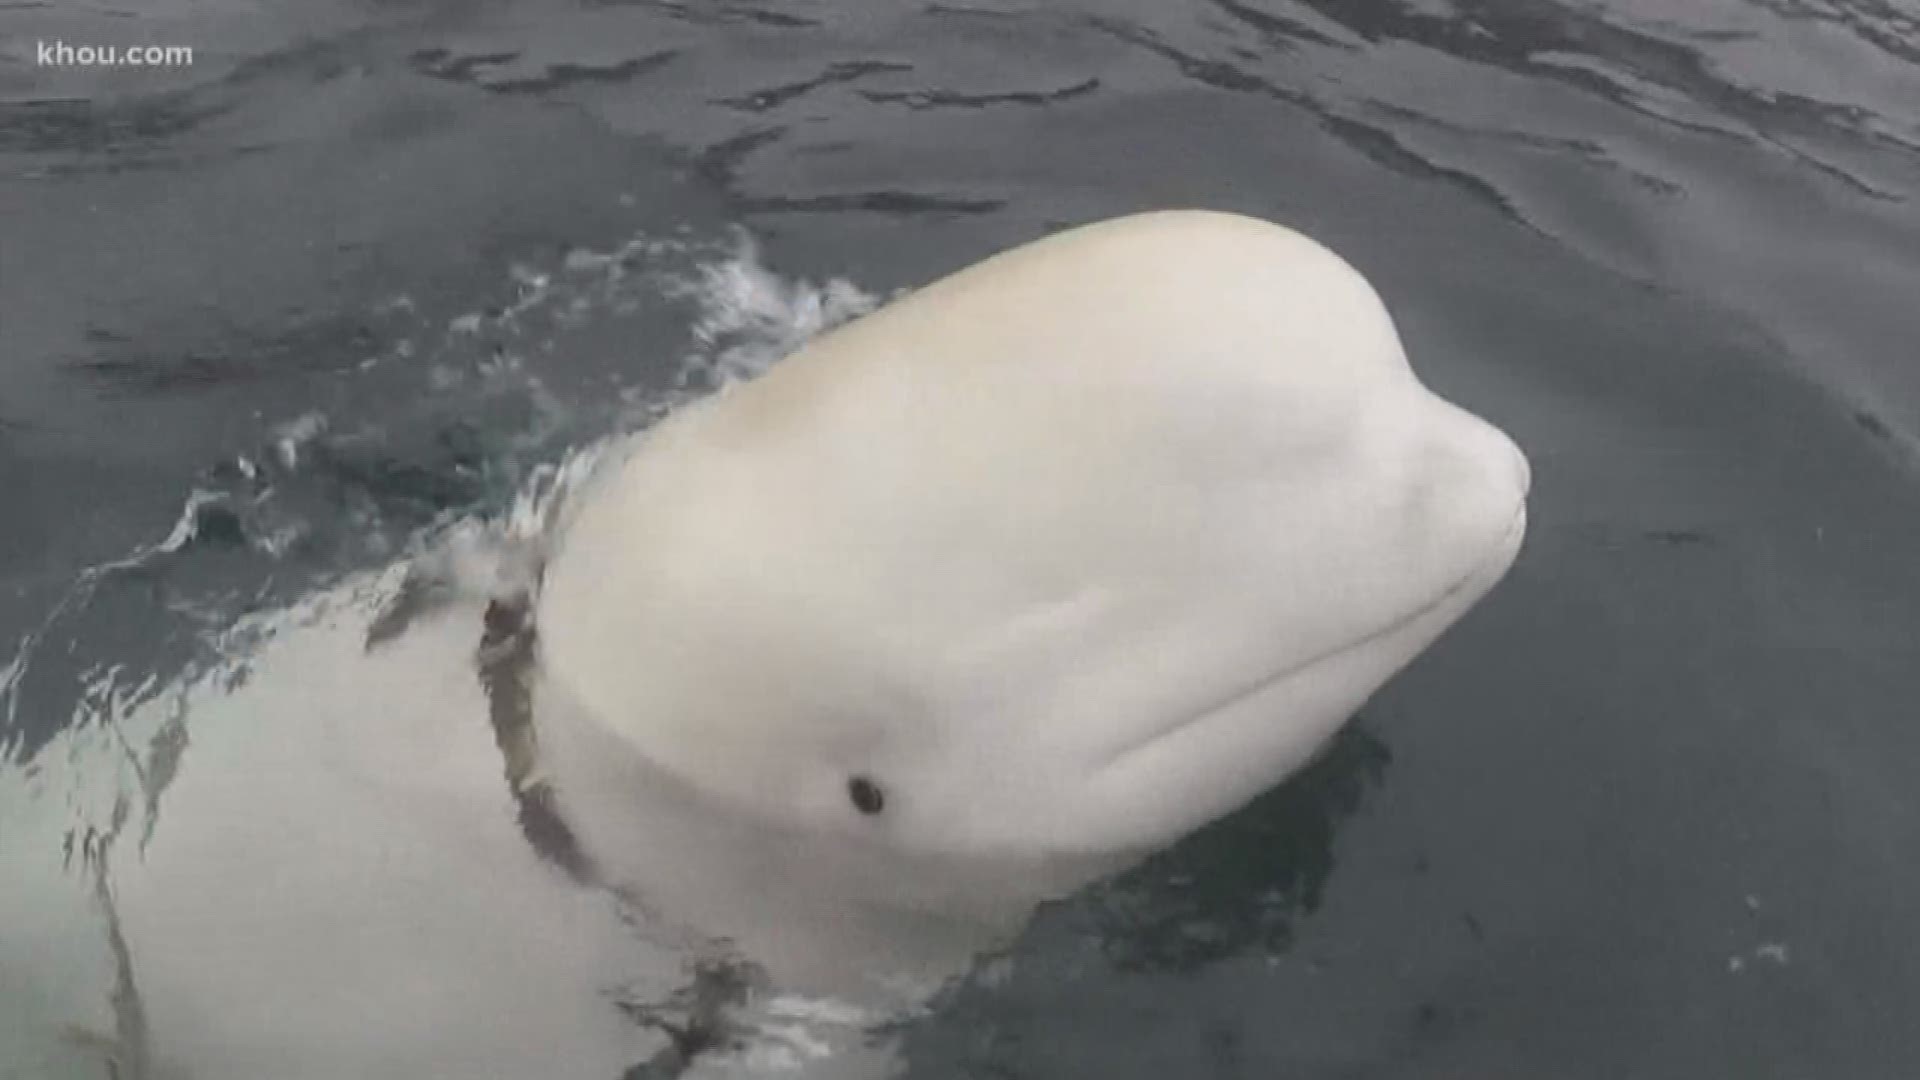 In this week's critter news, a Beluga whale found wearing a tight harness has prompted speculation that it's working for the Russians and a sweet sea lion was found wandering along a busy highway.